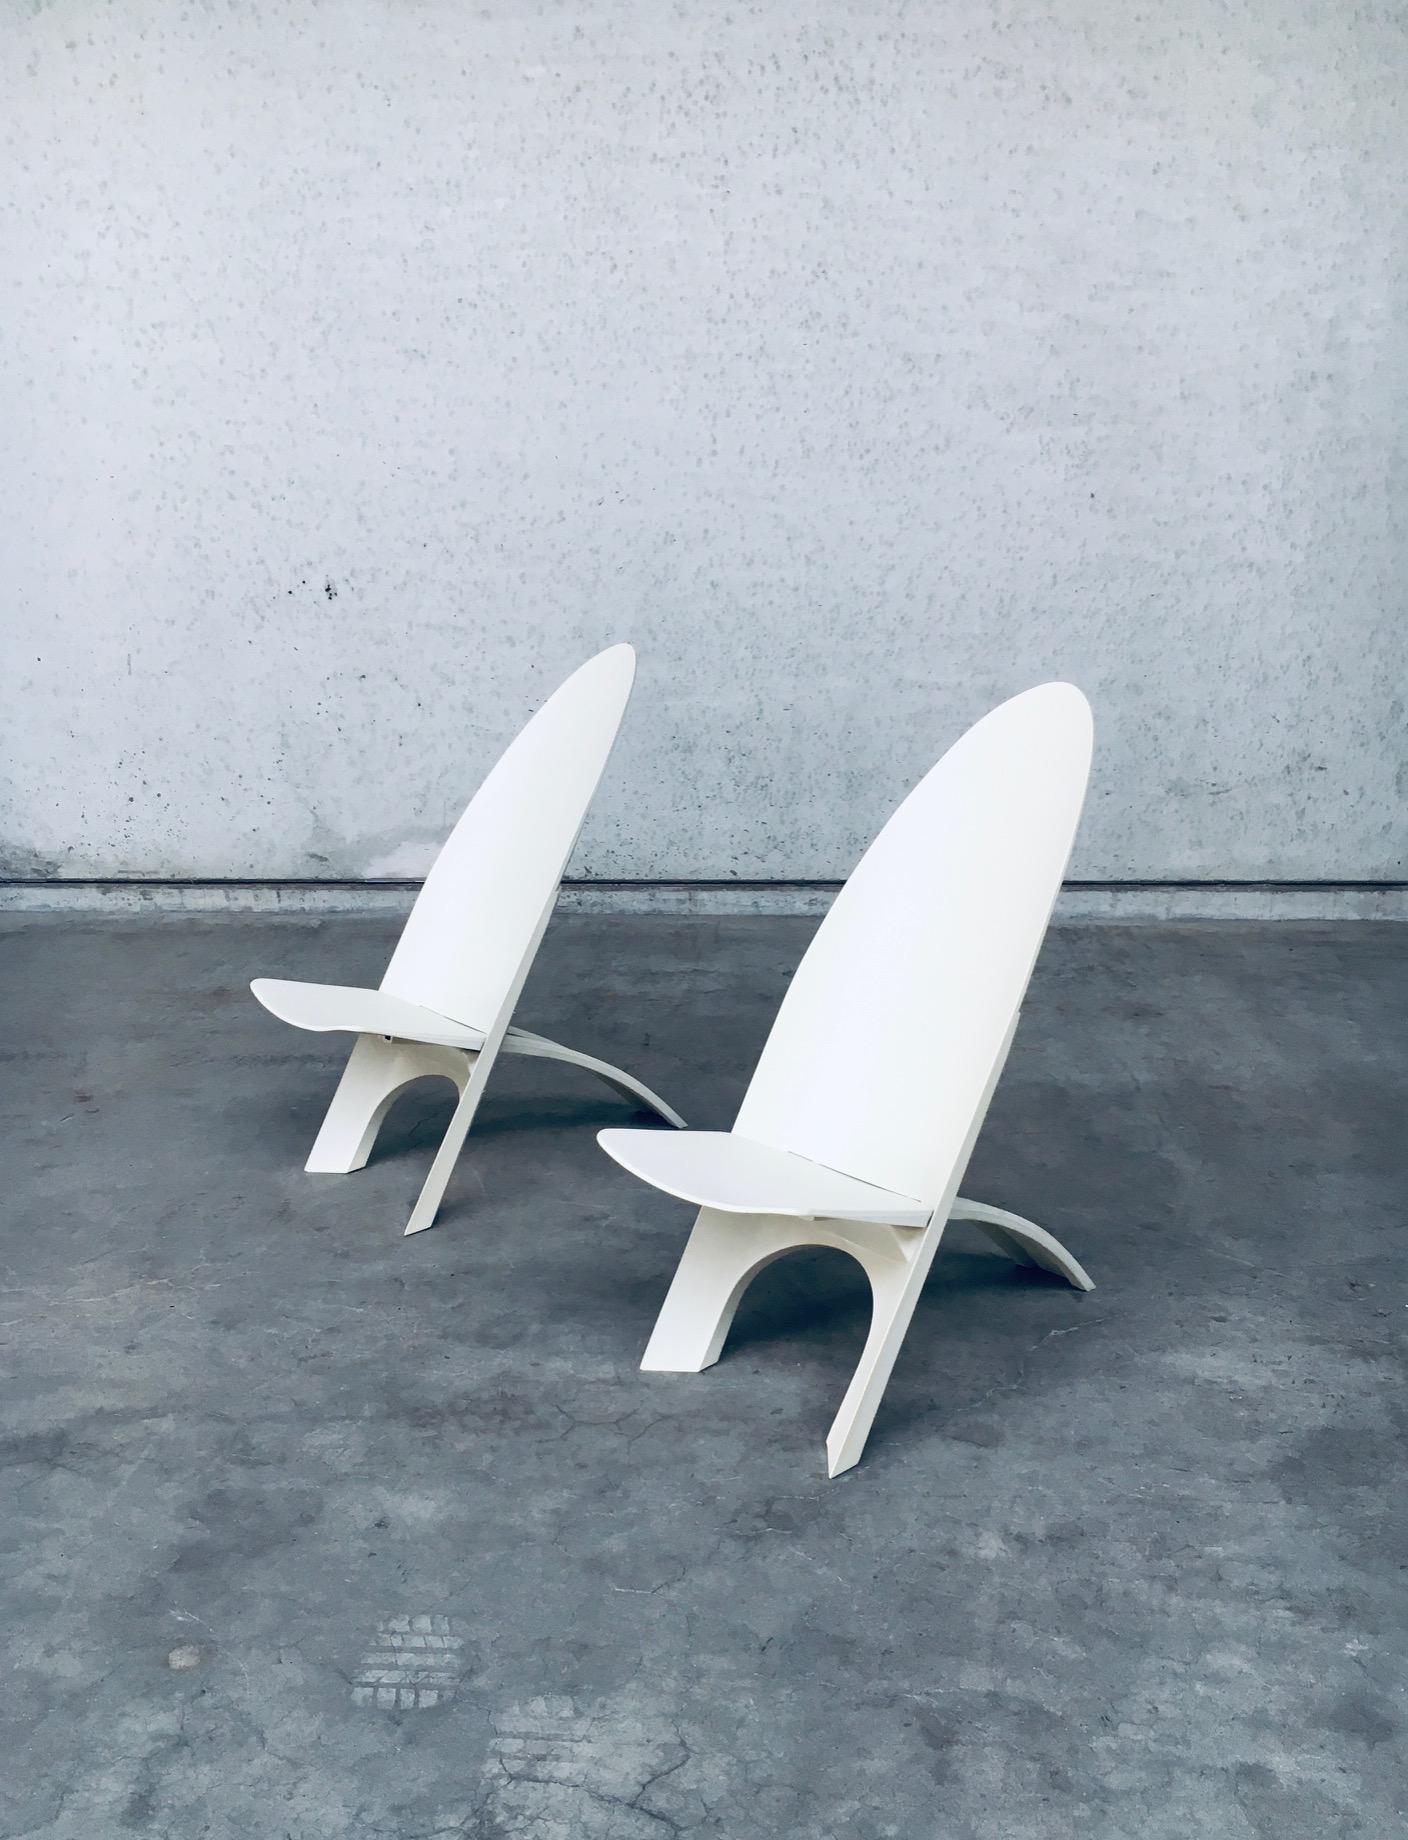 Rare Dutch Design Lounge chair set designed by Dr. B. Schwarz for Demury design. Marked; Dutch Design B.P.H. It is a shell chair of molded cream white plastic Material with two integrated parts. Both chairs are in very good condition with slight